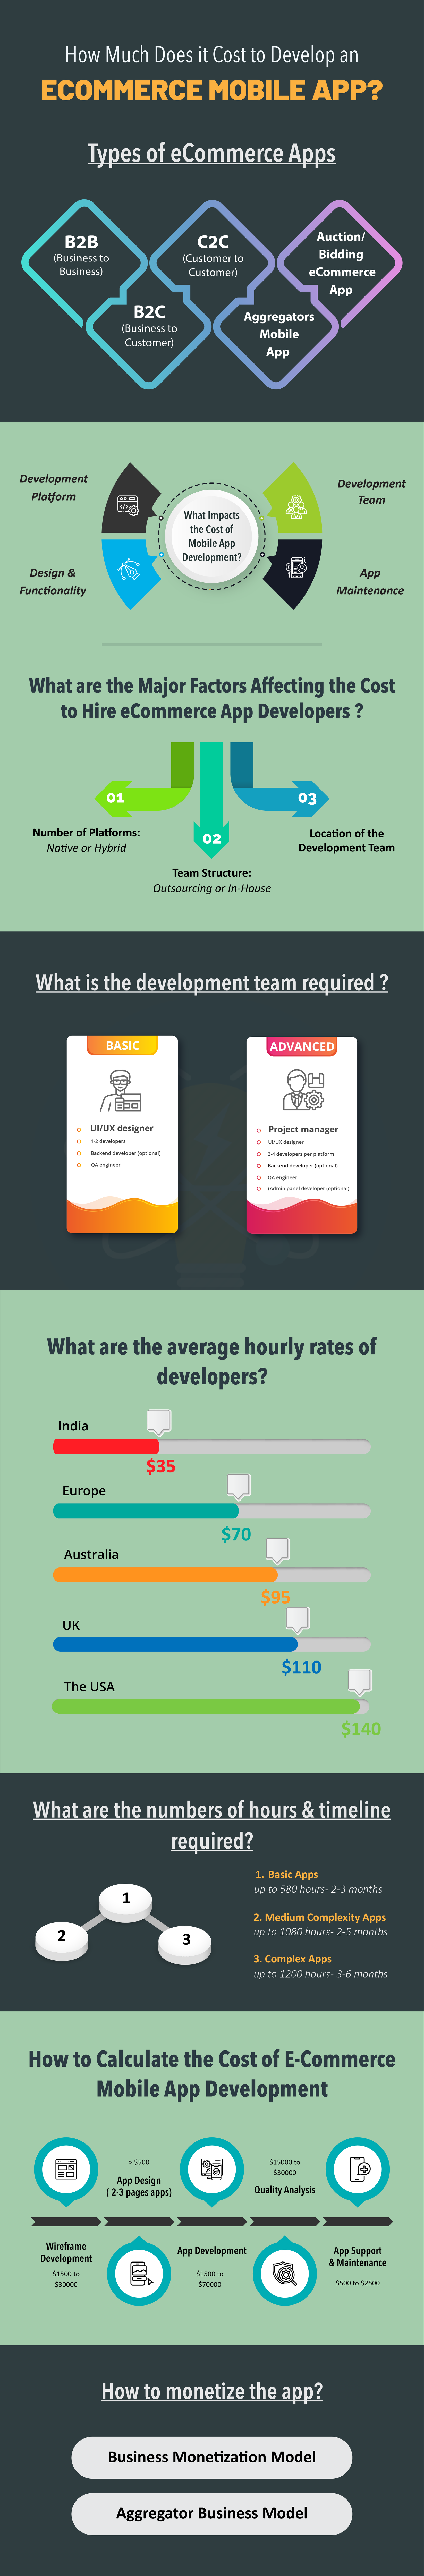 How Much Does it Cost to Develop an eCommerce Mobile App